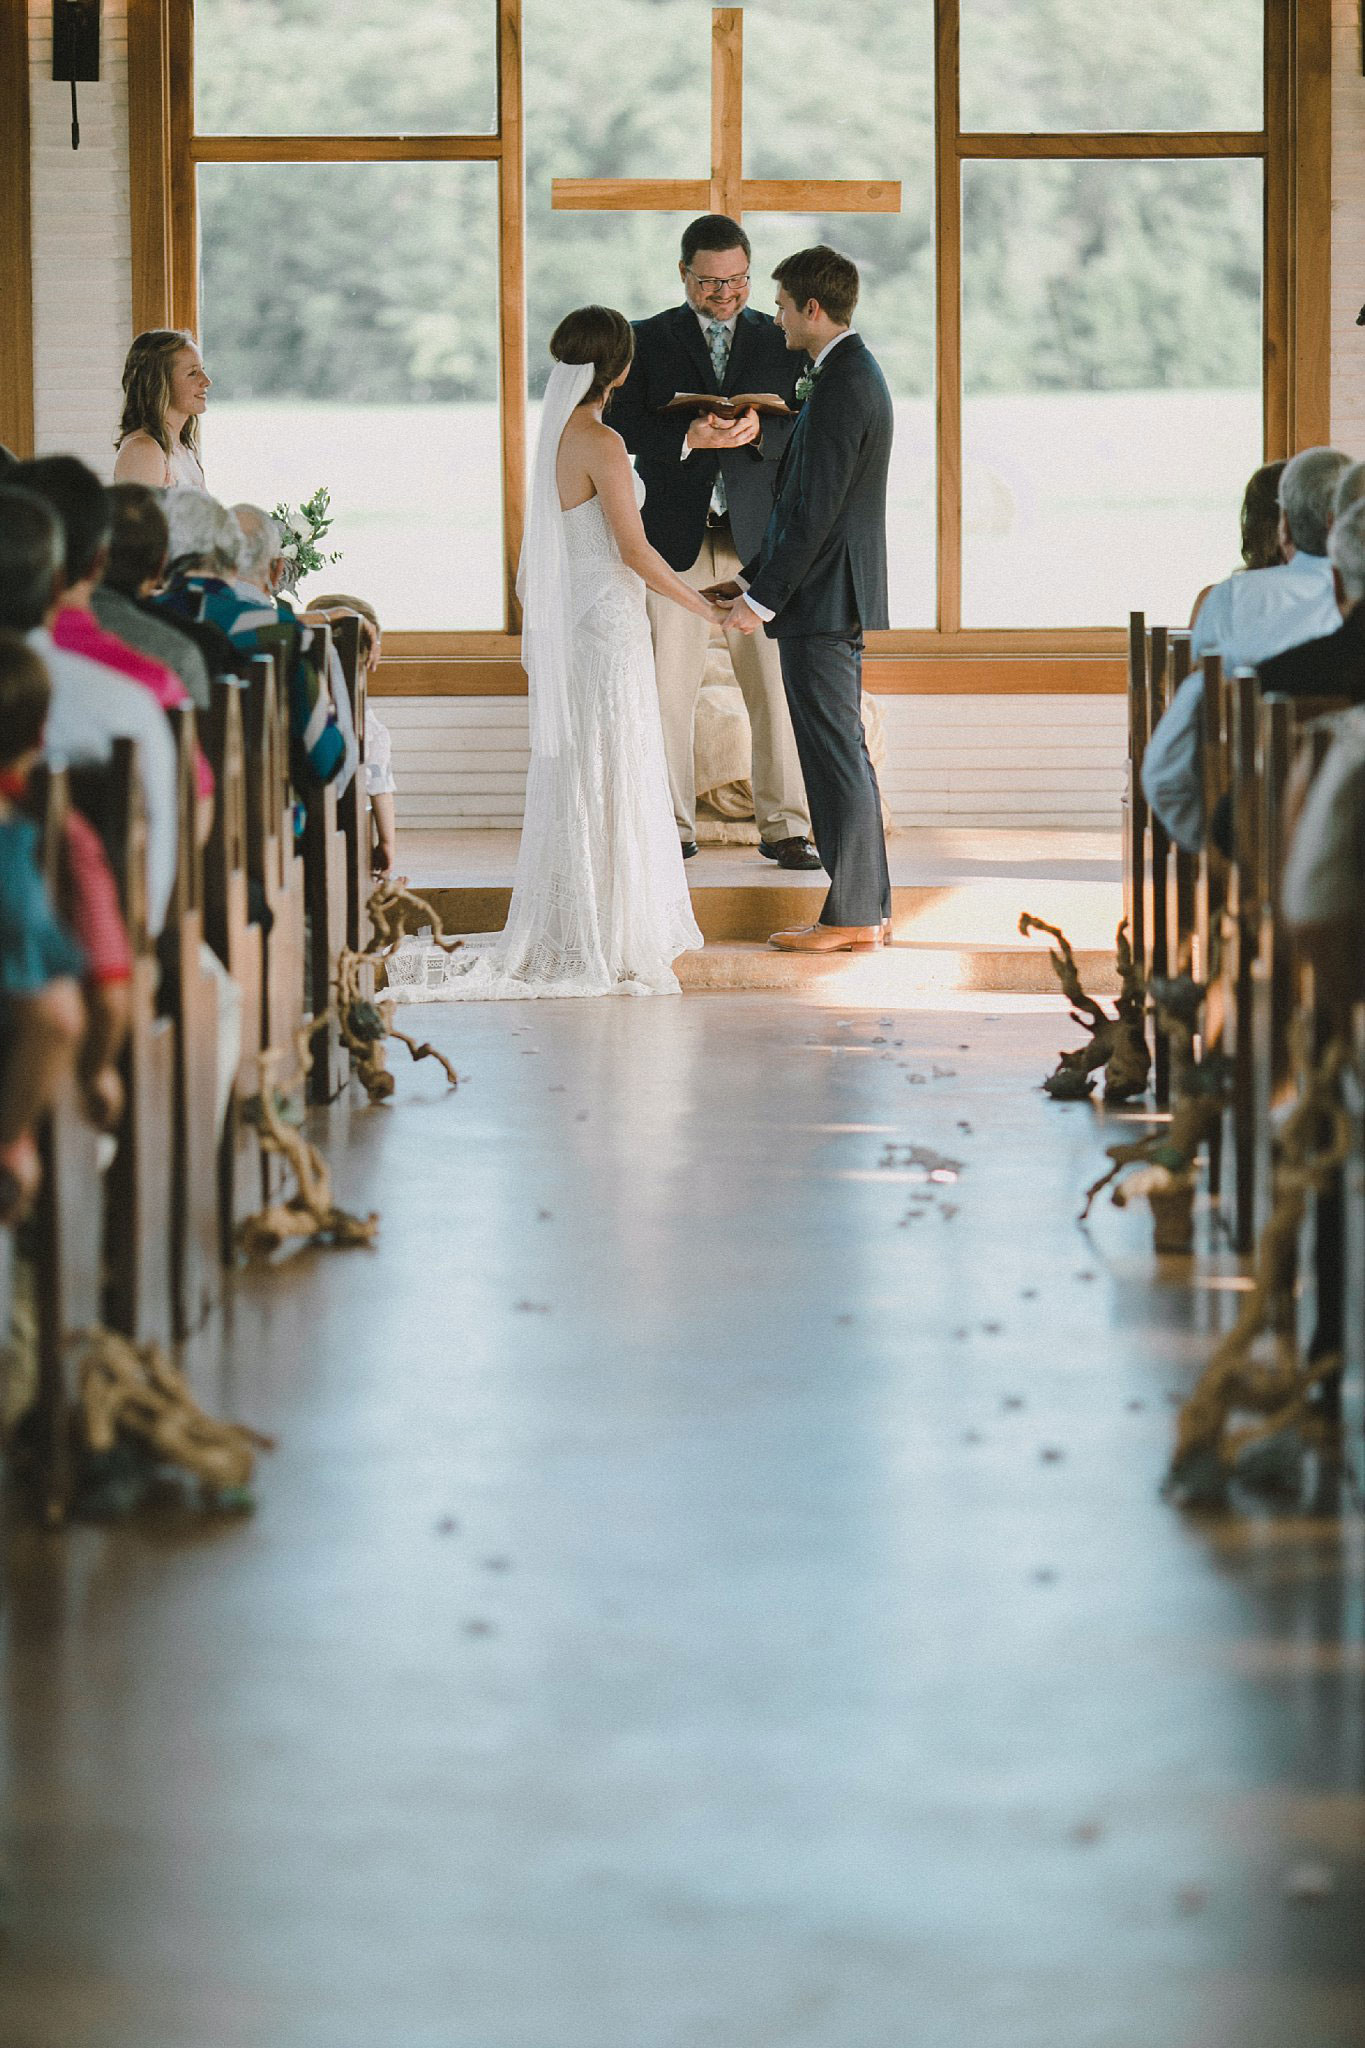 Brooks at Weatherford wedding ceremony with driftwood lining the wedding aisle